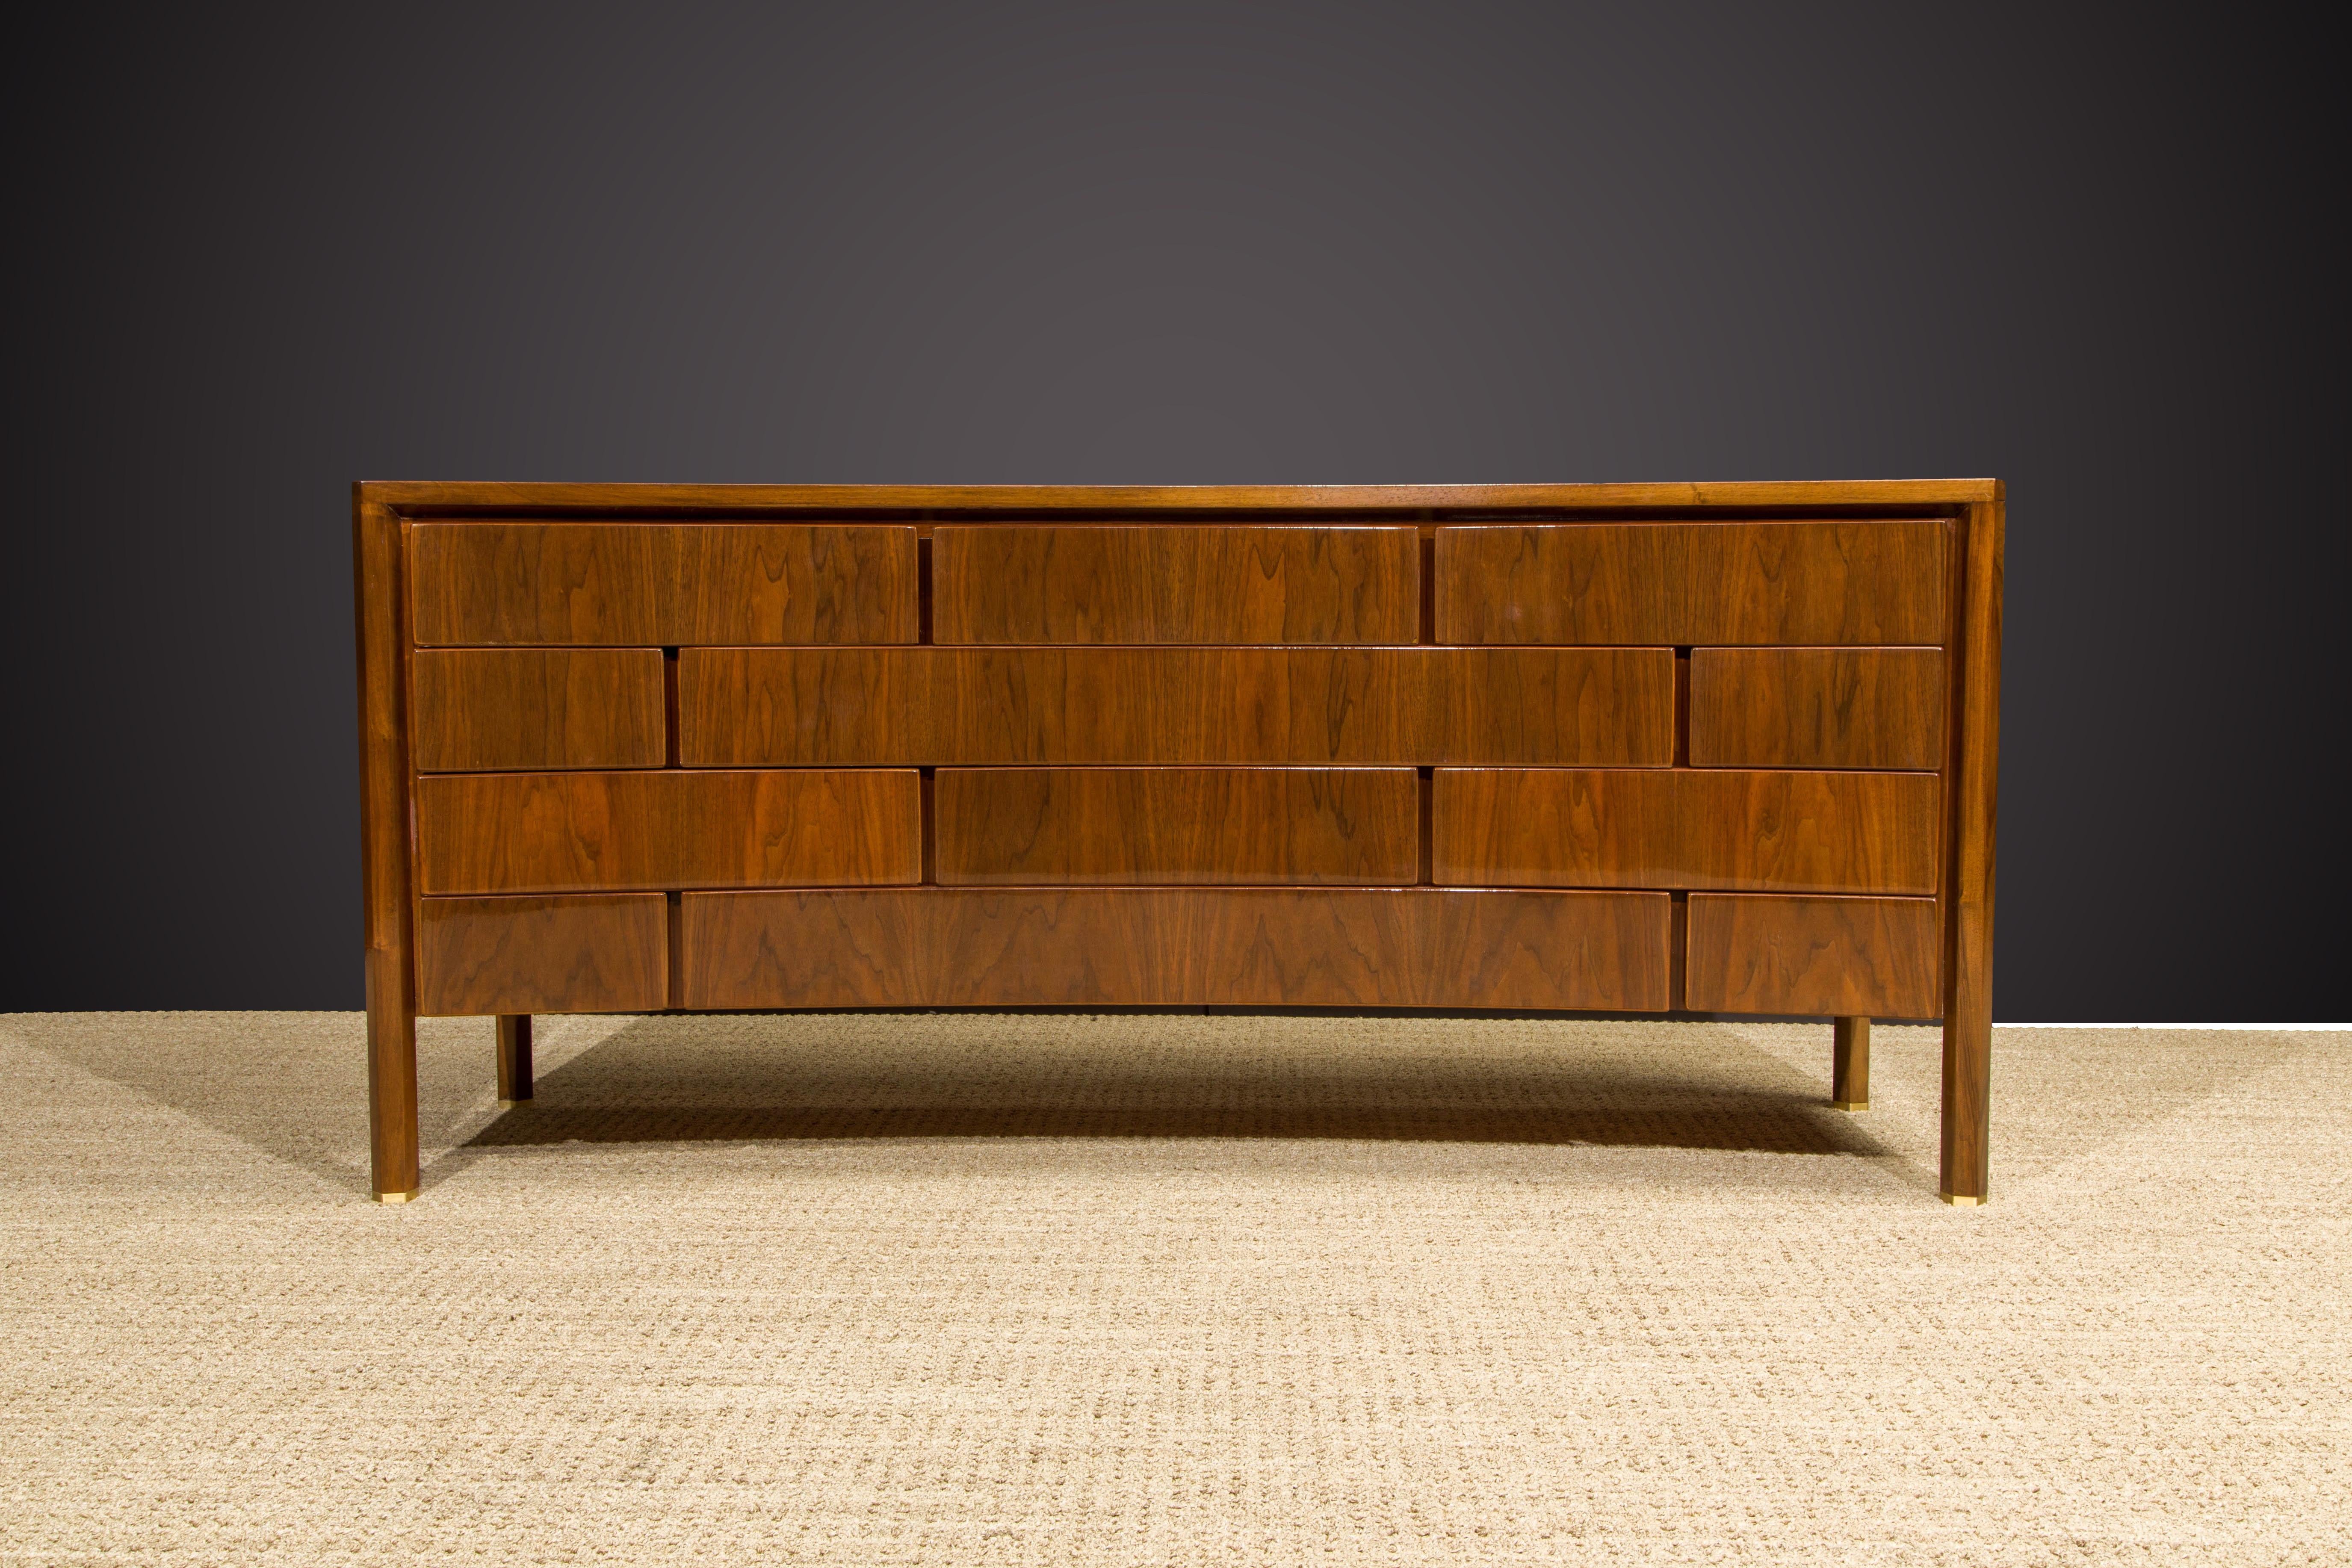 This impressive twelve-drawer dresser in walnut was designed by Edmond J. Spence and made in Sweden in the late 1950s to early 1960s. We just completed refinishing it with an expensive French Polish, the most laborious finish available due to its